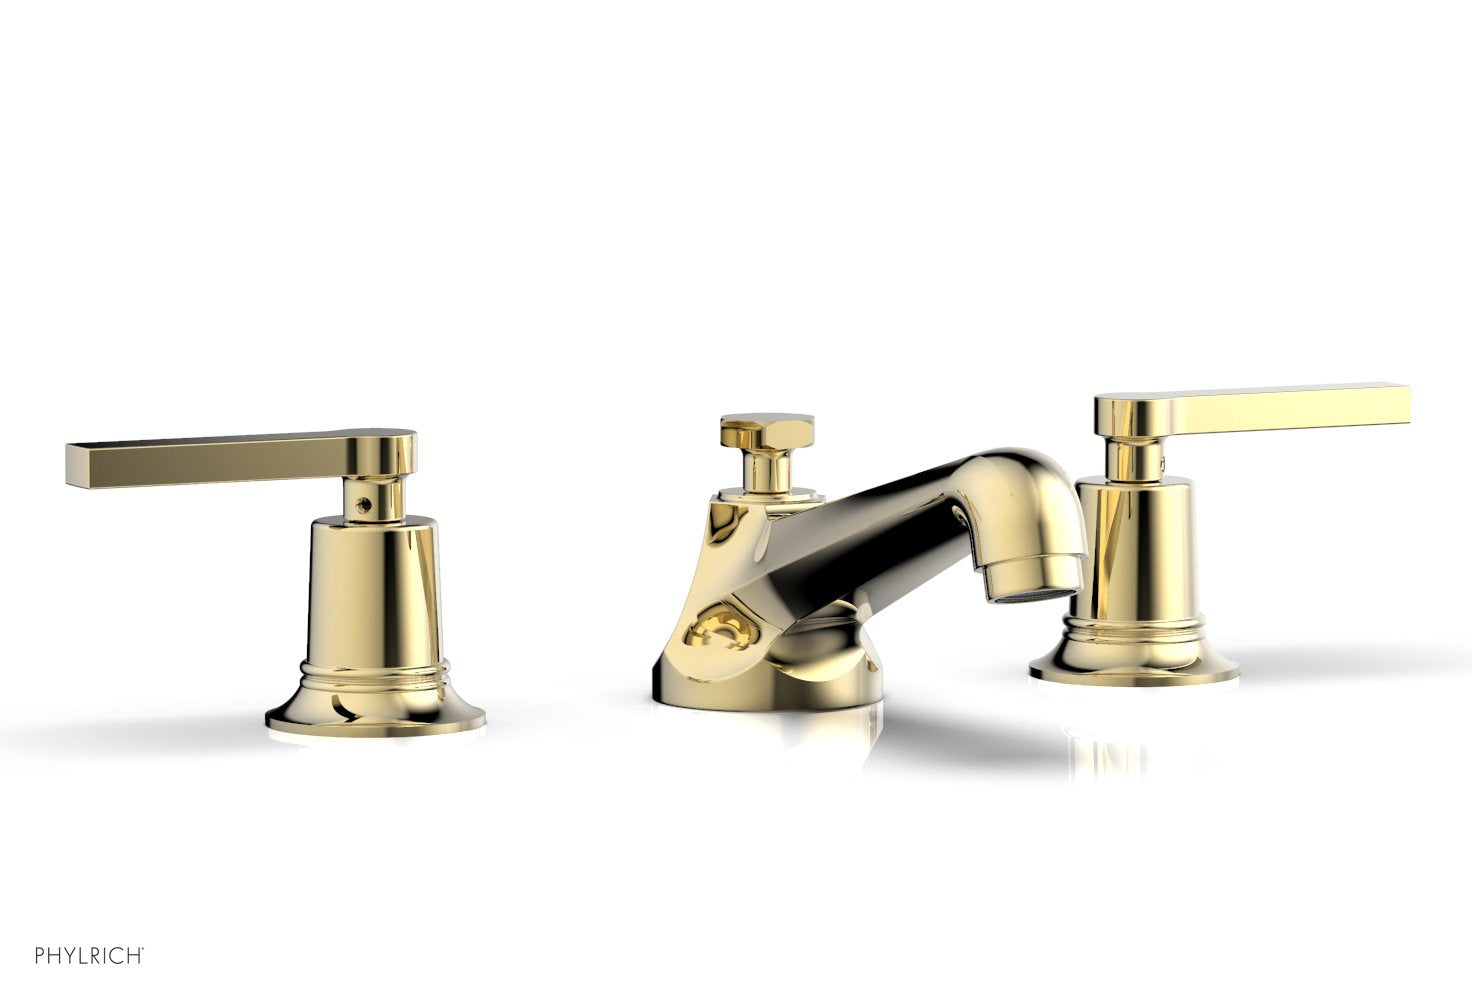 Phylrich HEX MODERN Widespread Faucet Low Lever Handles